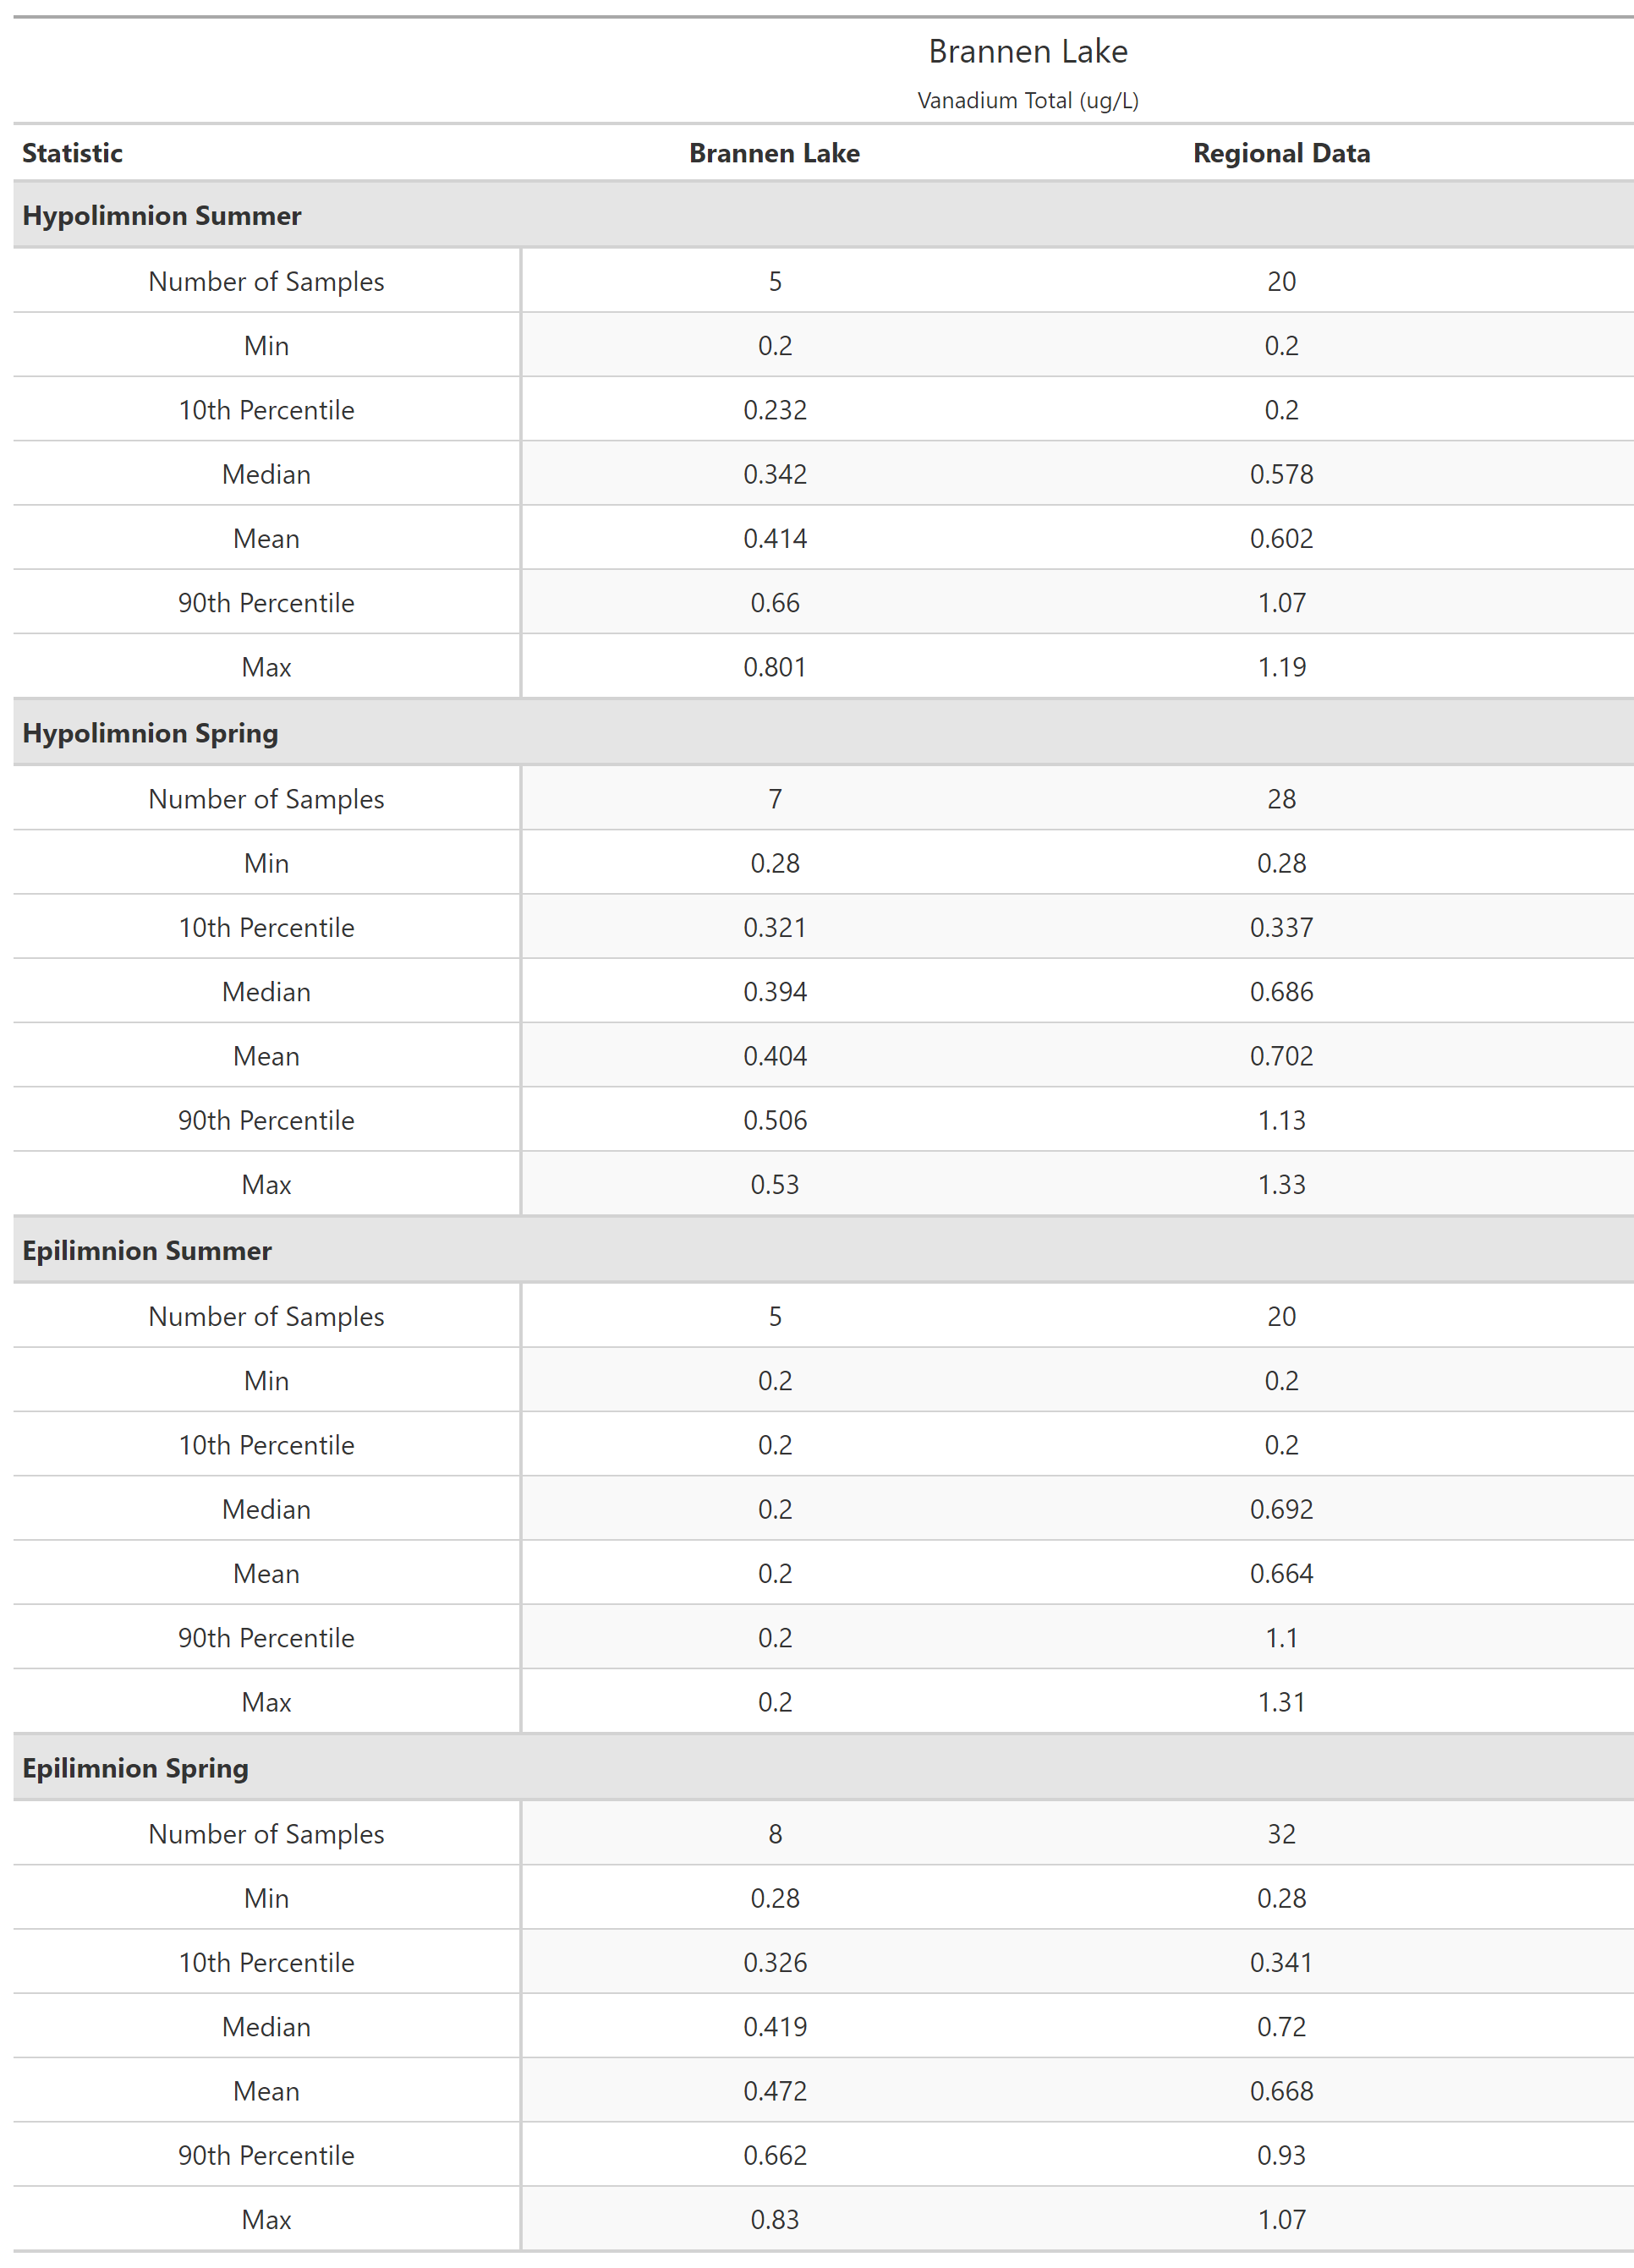 A table of summary statistics for Vanadium Total with comparison to regional data